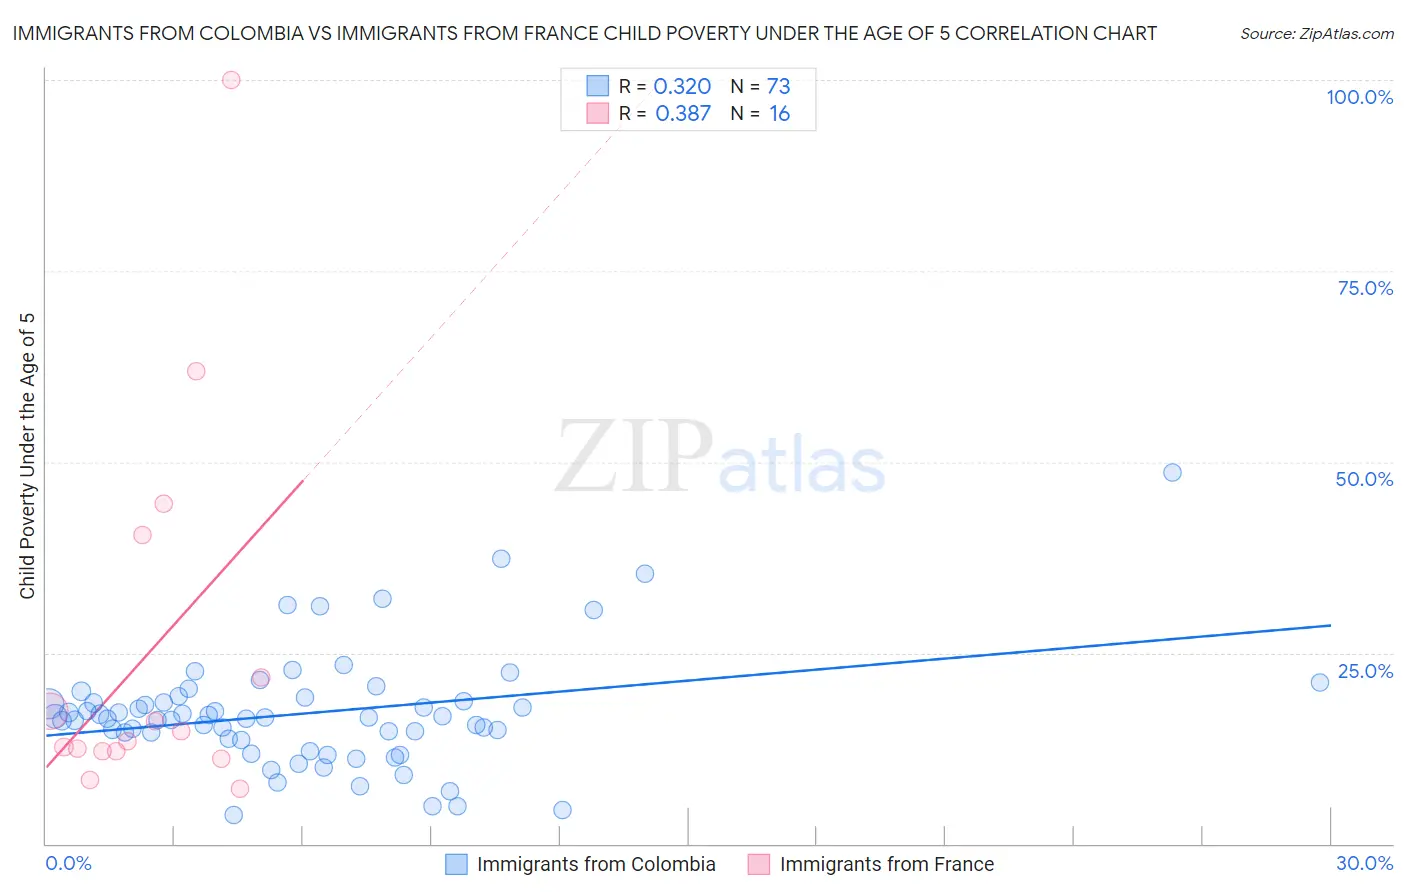 Immigrants from Colombia vs Immigrants from France Child Poverty Under the Age of 5